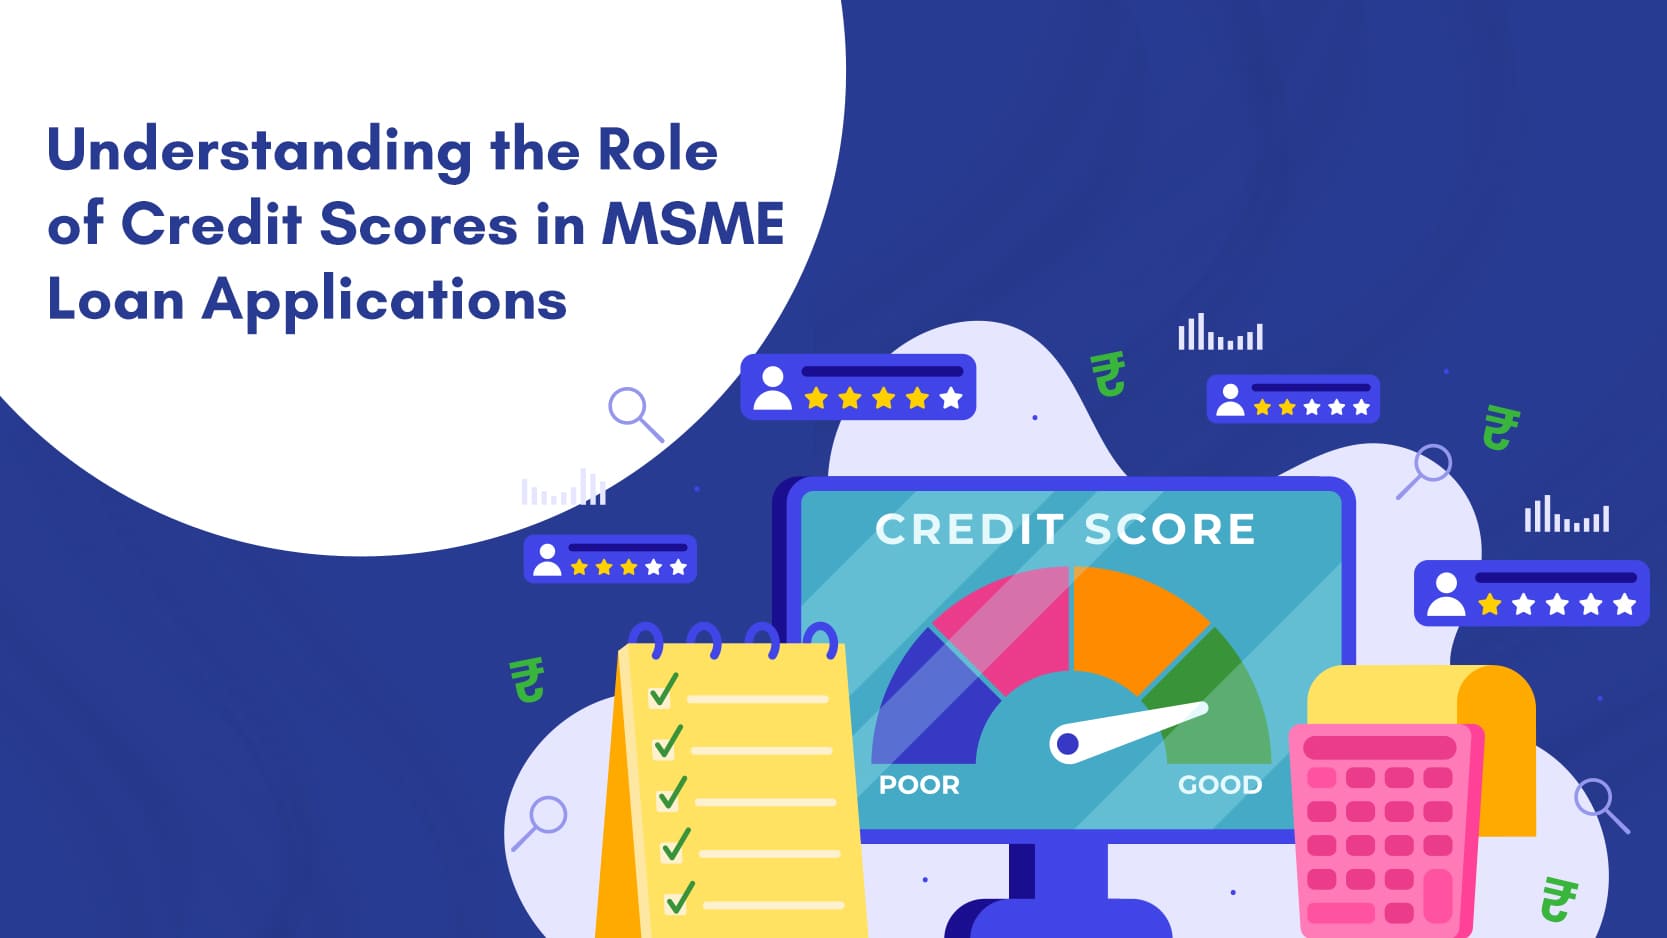 Understanding the Role of Credit Scores in MSME Loan Applications